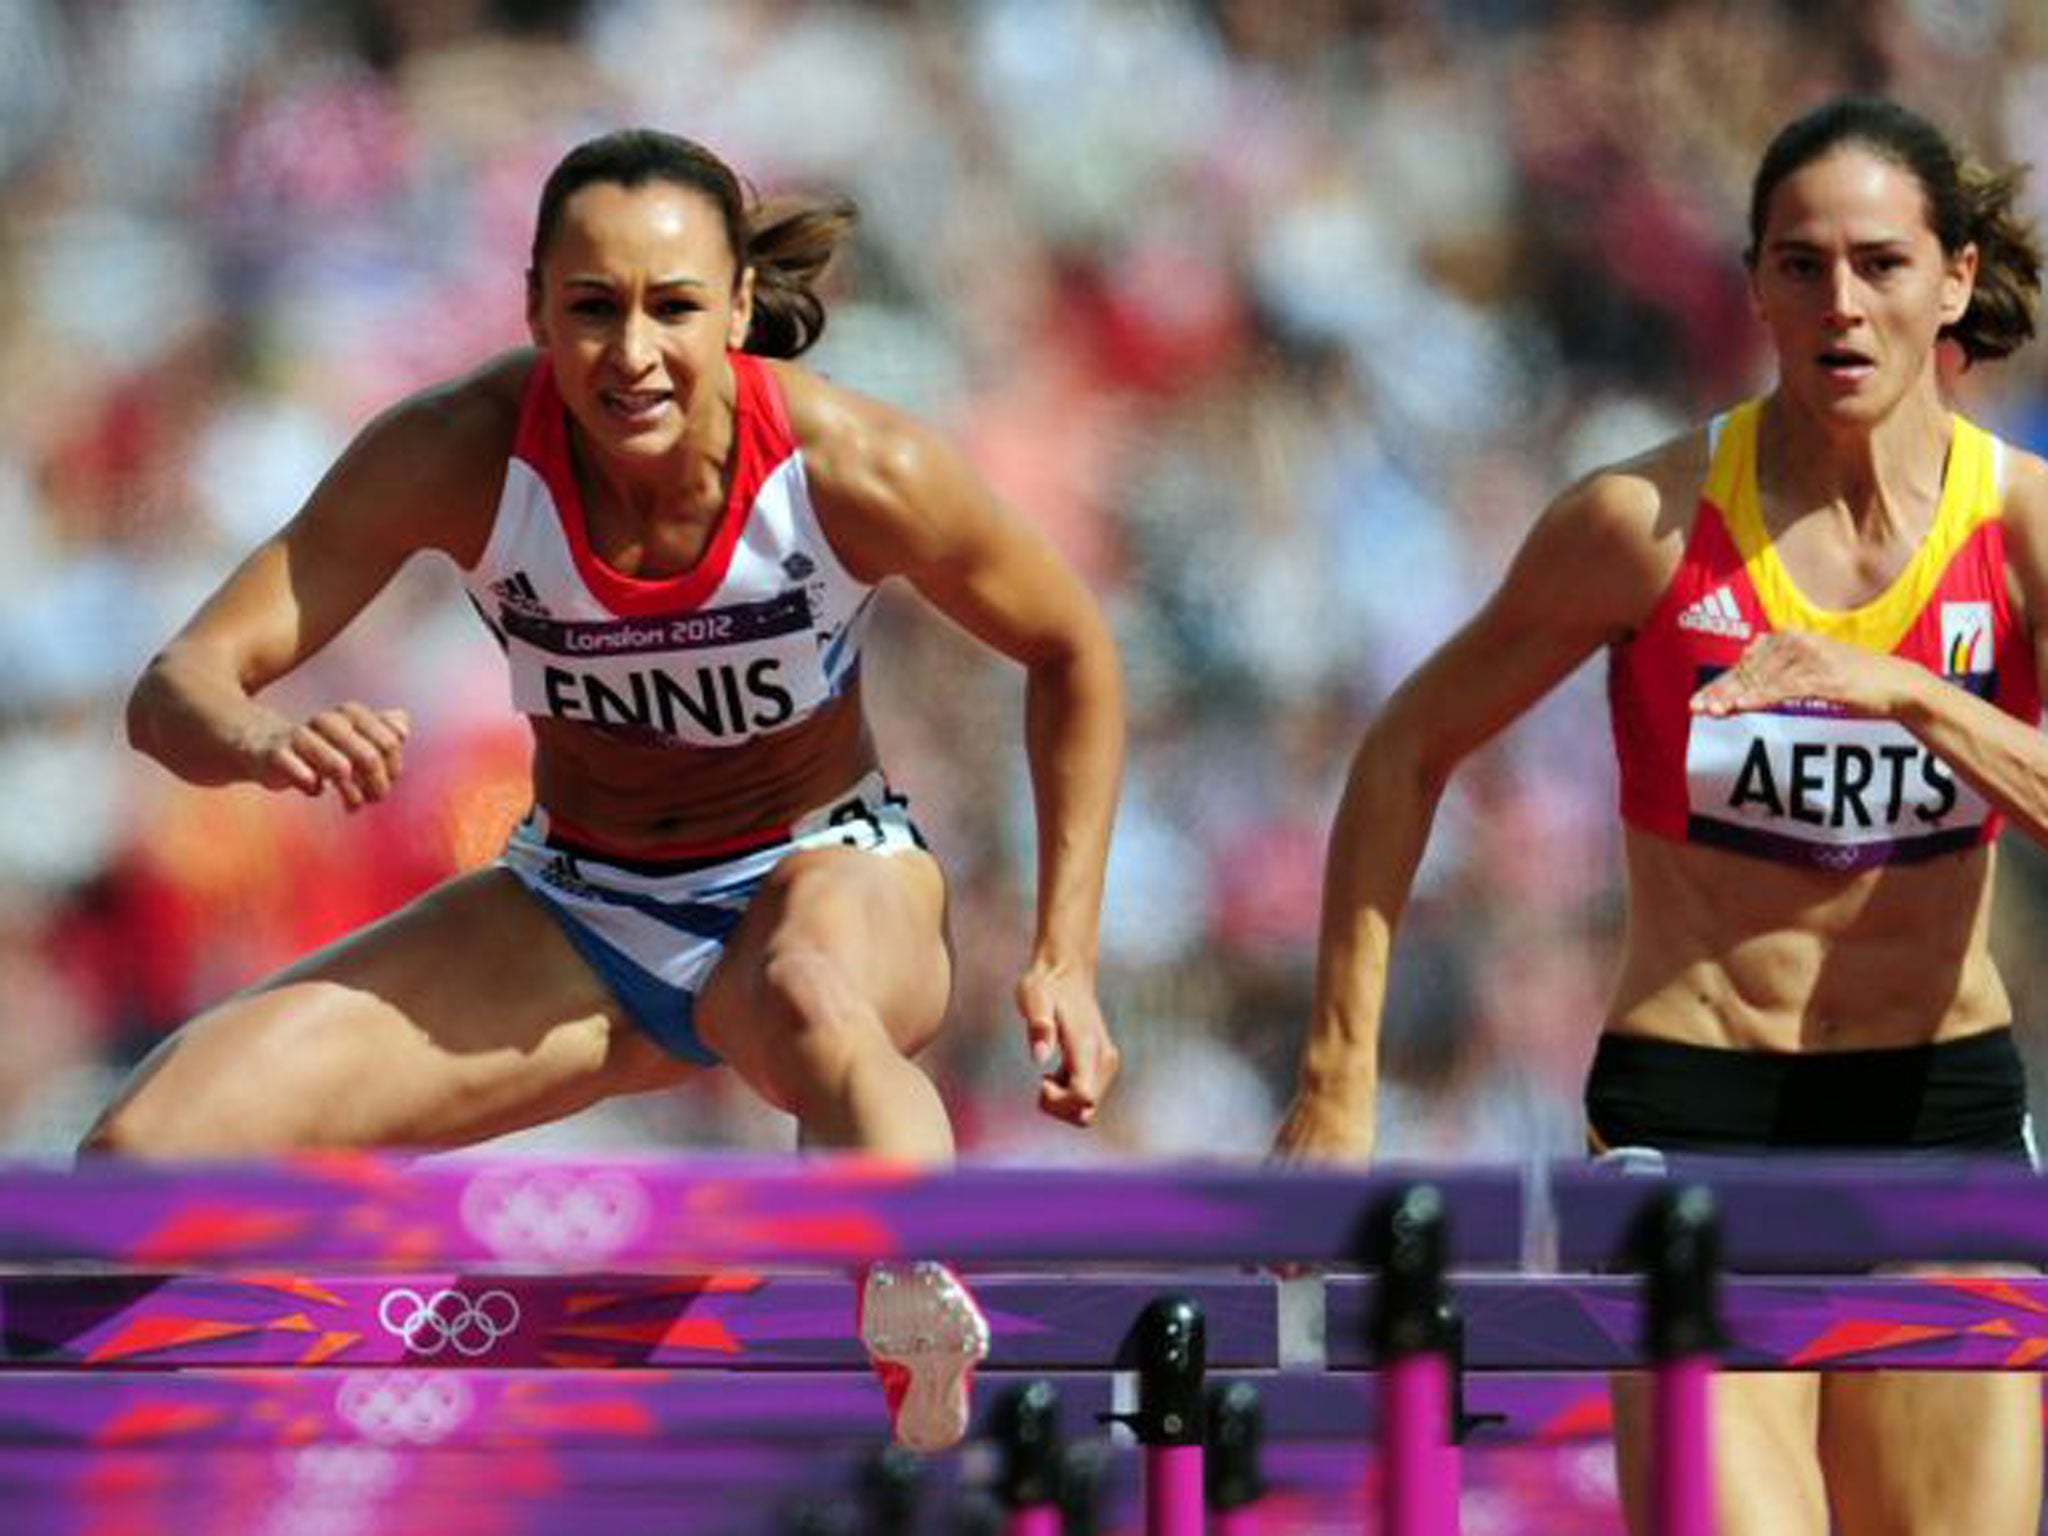 “Under Pressure? Tell me about it,” Jess Ennis must have been thinking to herself as she clocked on for the opening shift in her two-day, seven-event date with destiny